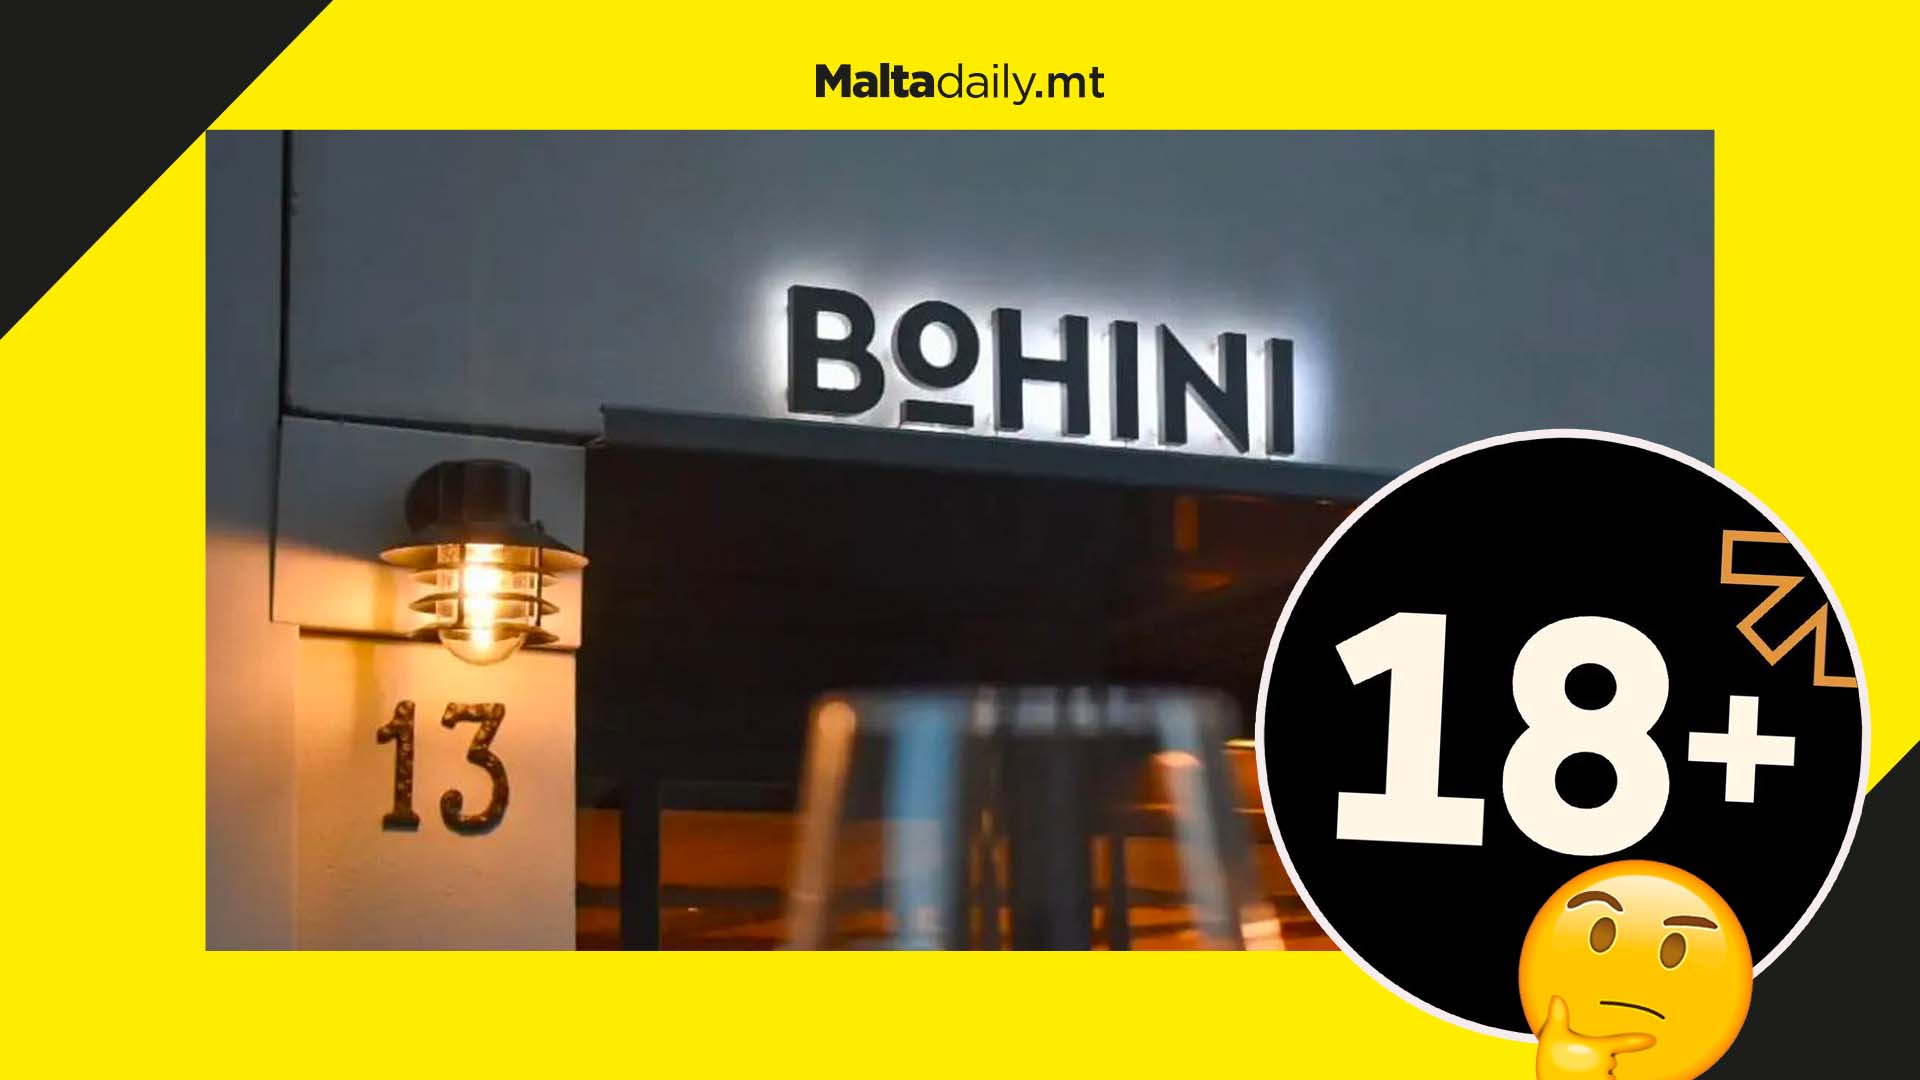 Mgarr eatery Bohini places 18 and over age limit for all customers